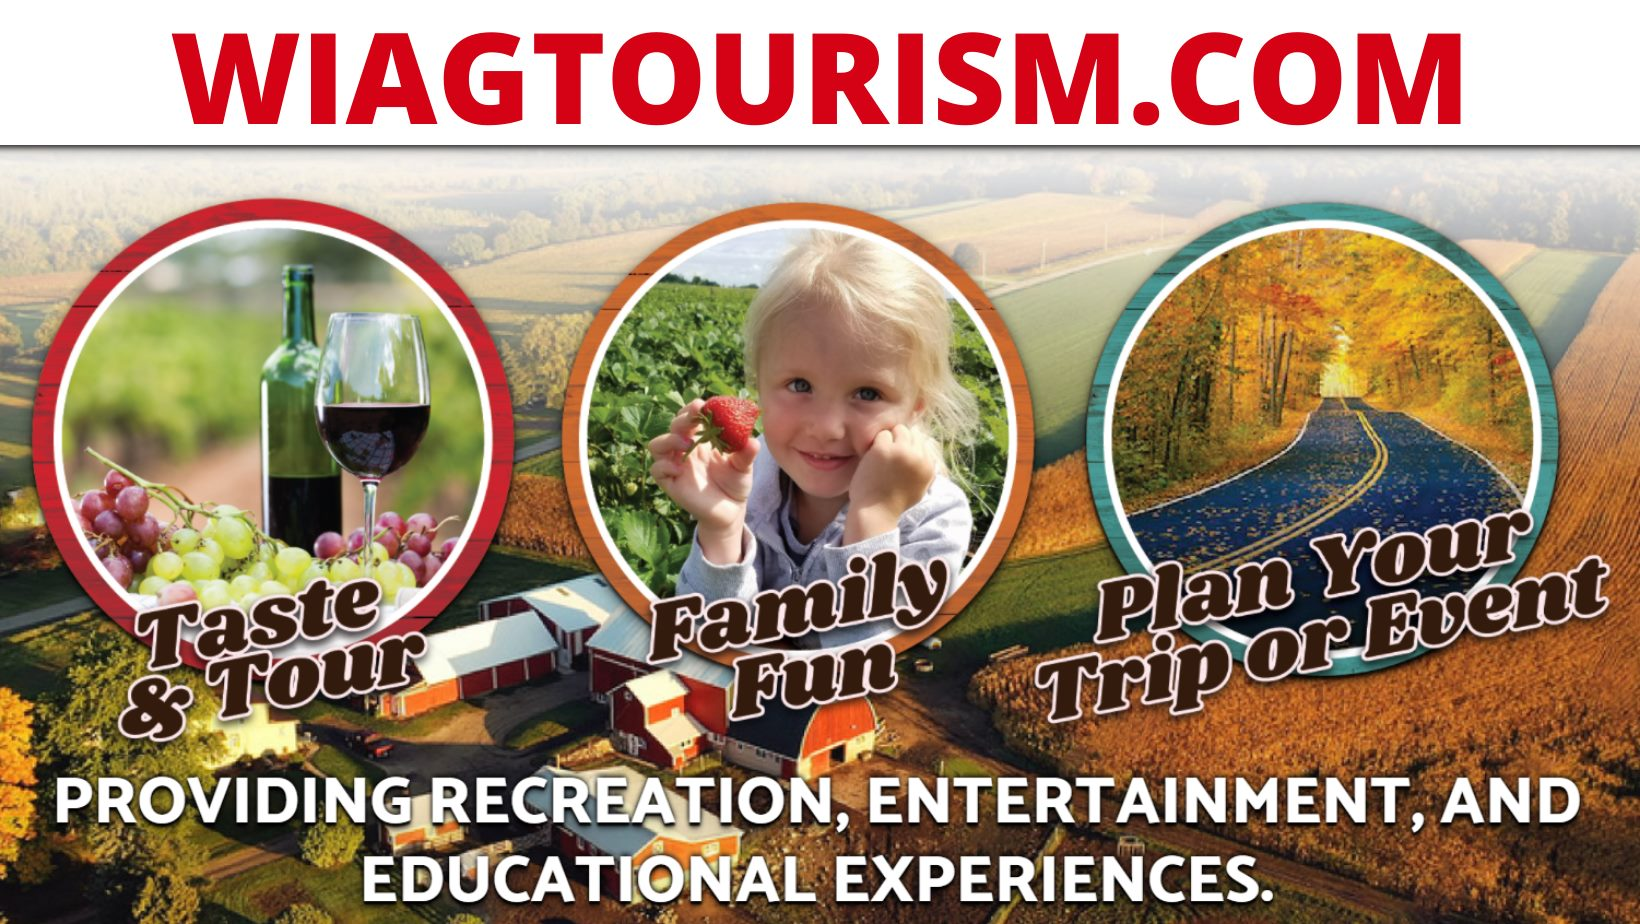 Agriculture Tourism Essential To Wisconsin